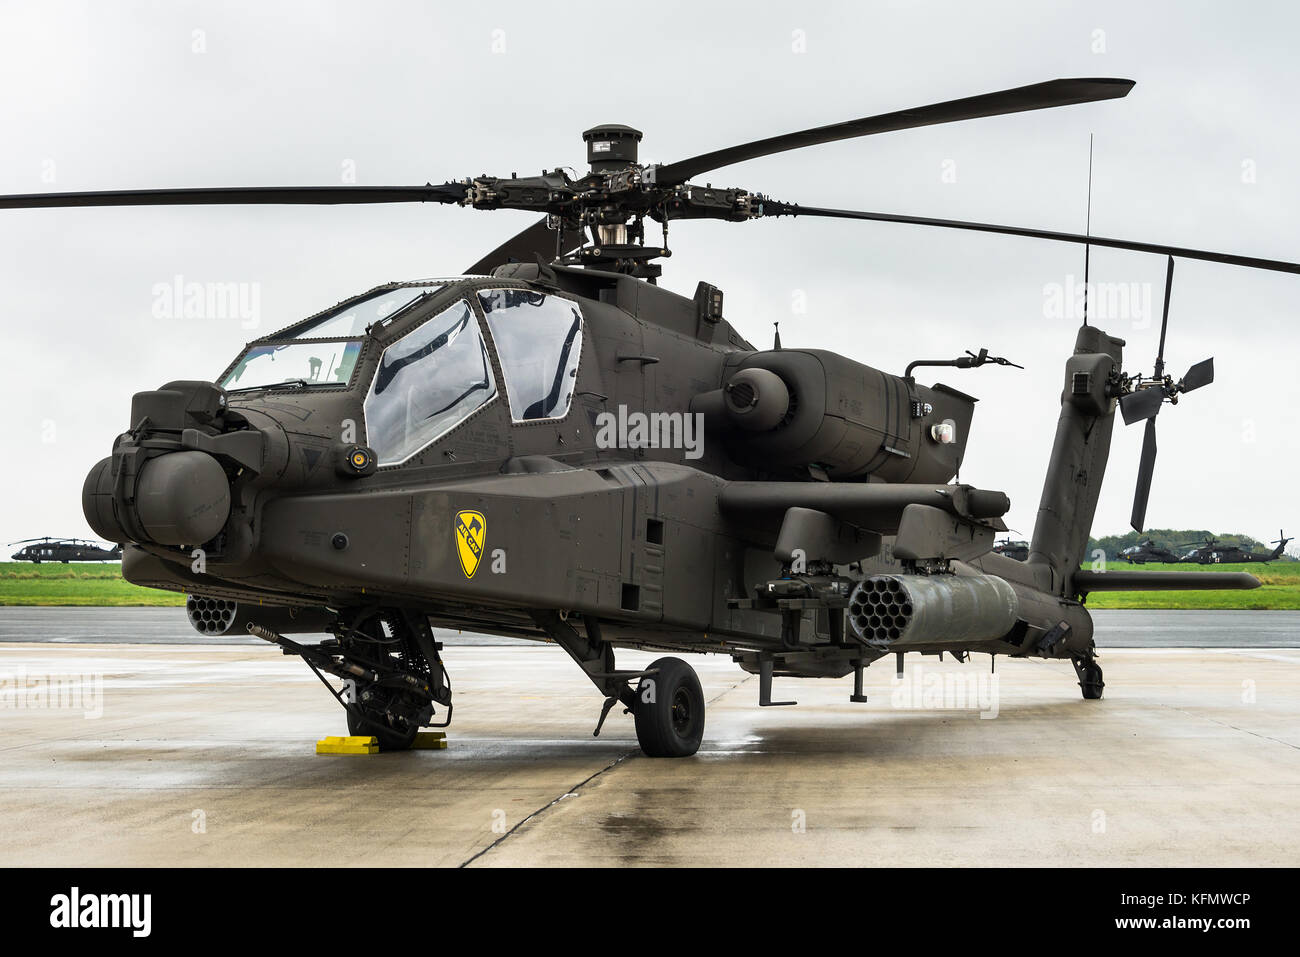 A Boeing AH-64 Apache attack helicopter of the 1st Cavalry Air Brigade of the US Army at the Chièvres Air Base in Belgium. Stock Photo